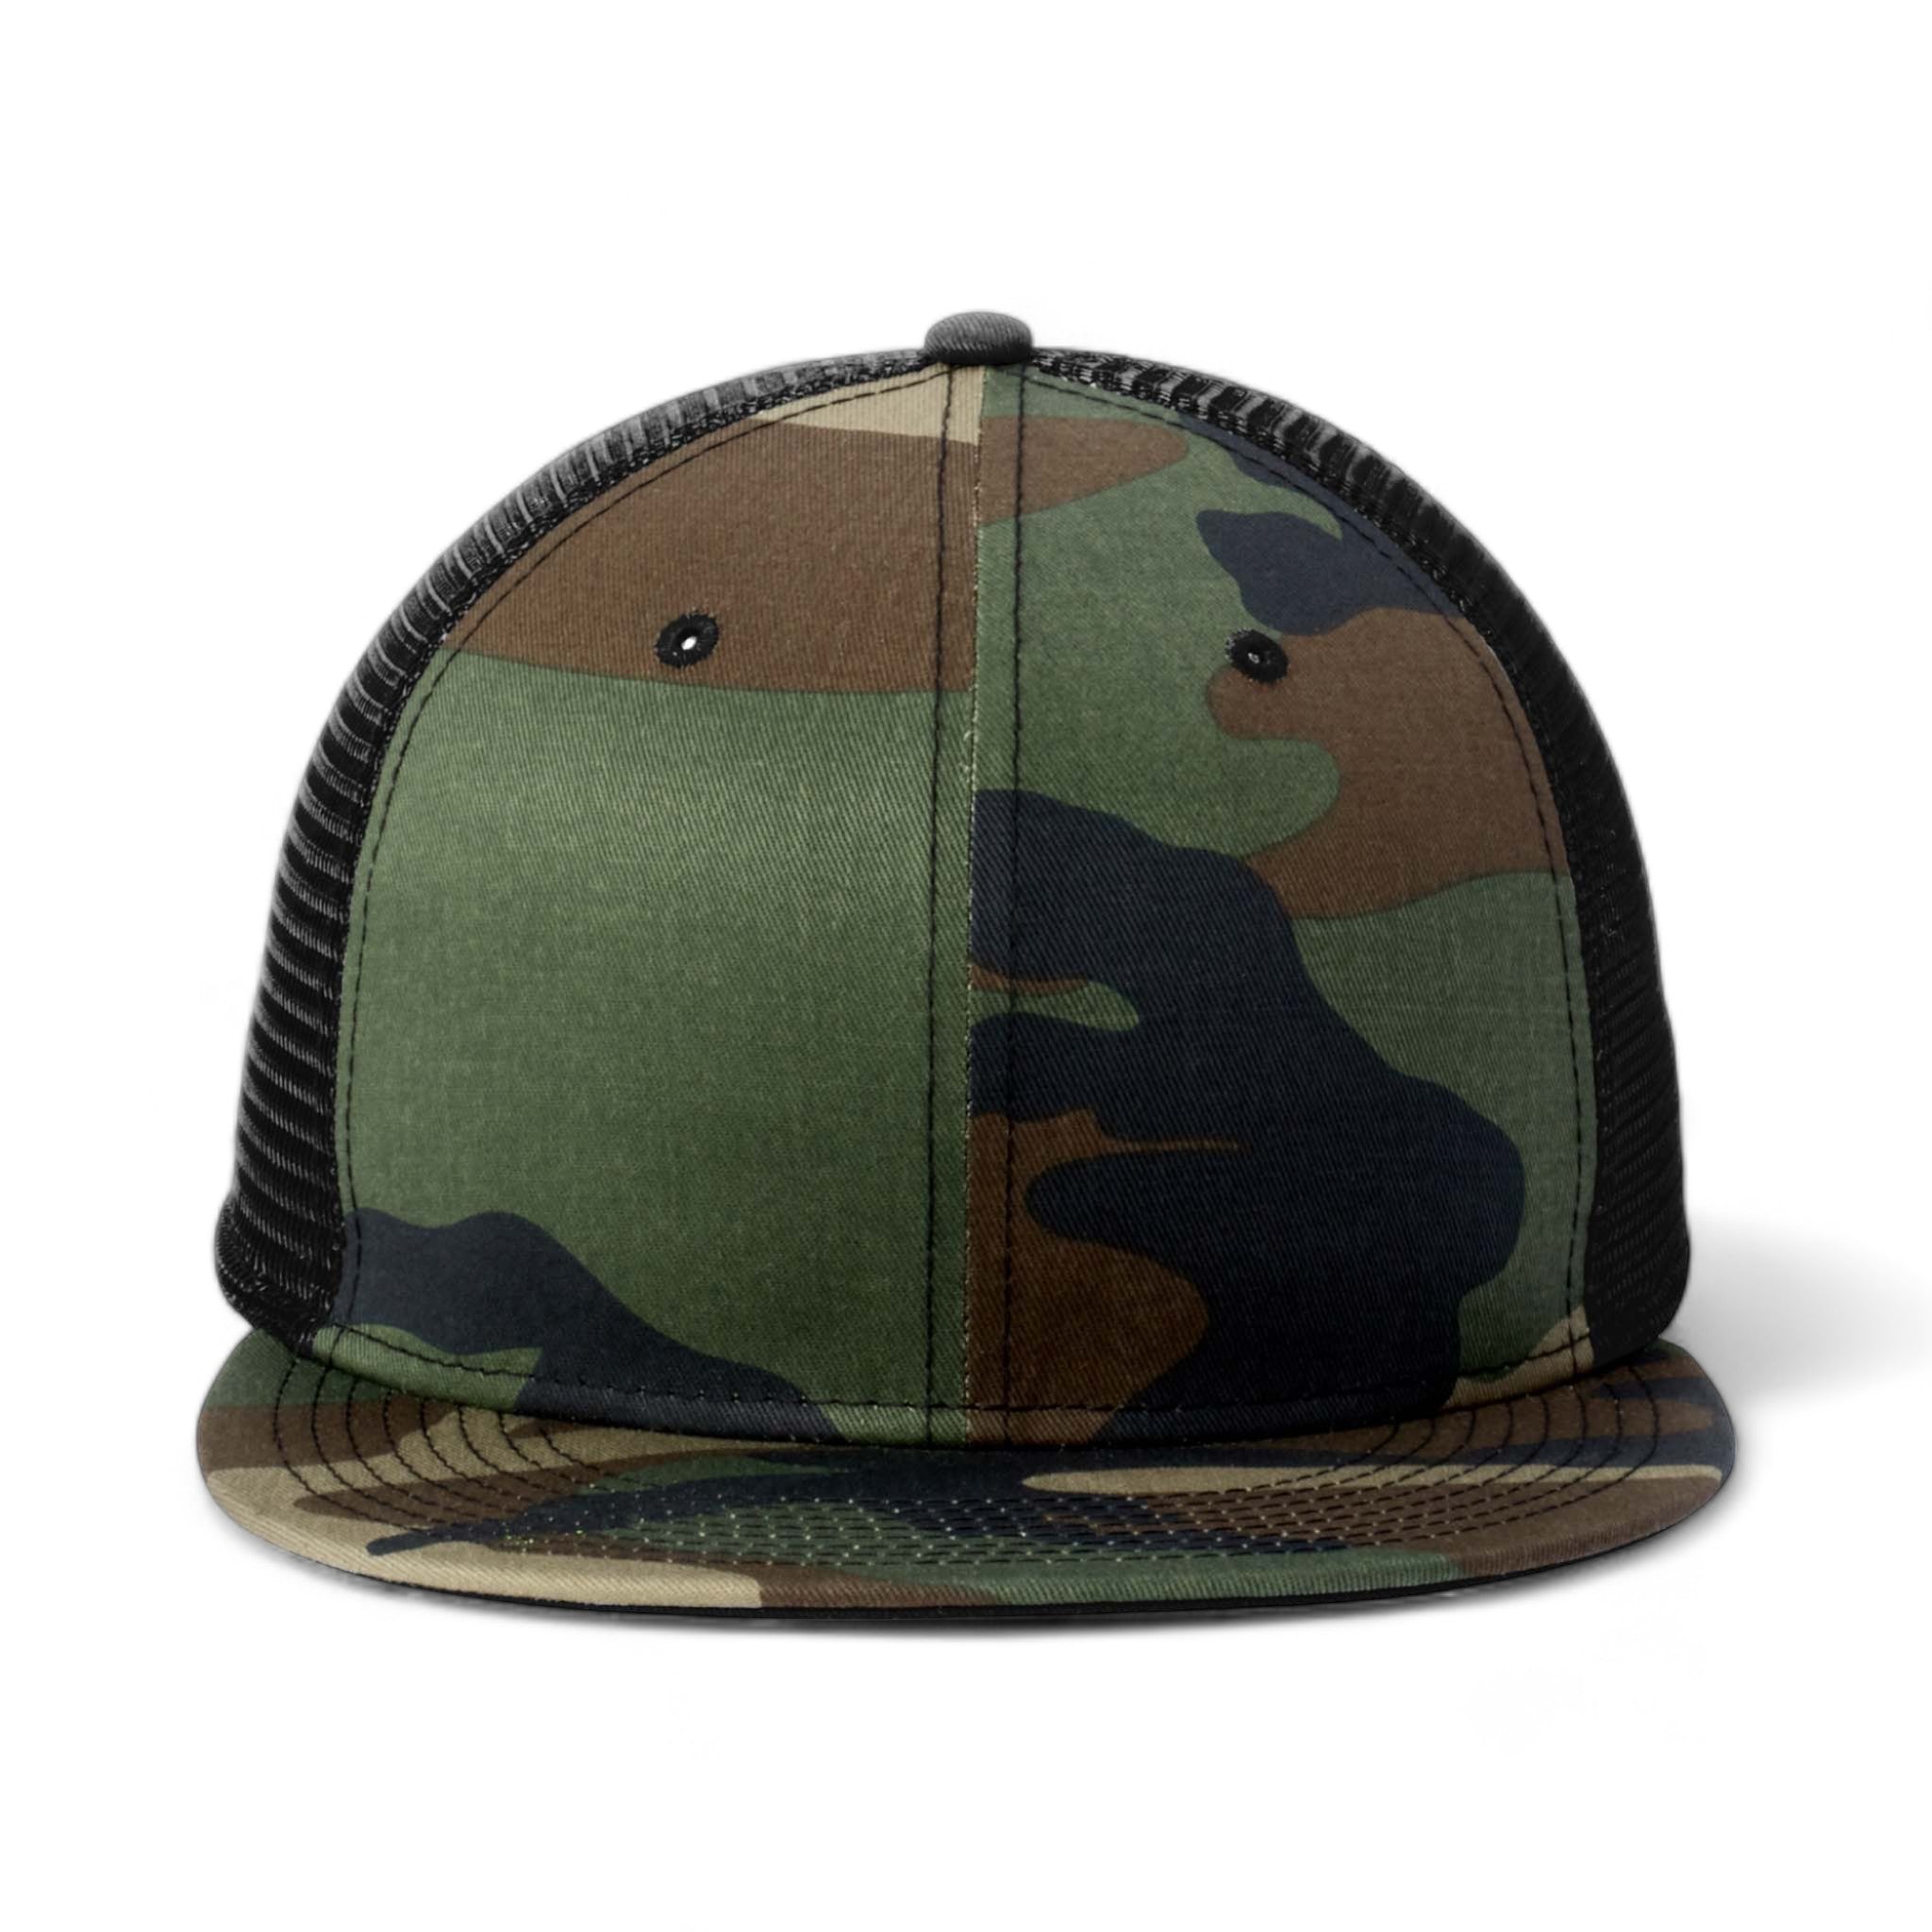 Front view of New Era NE4030 custom hat in camo and black